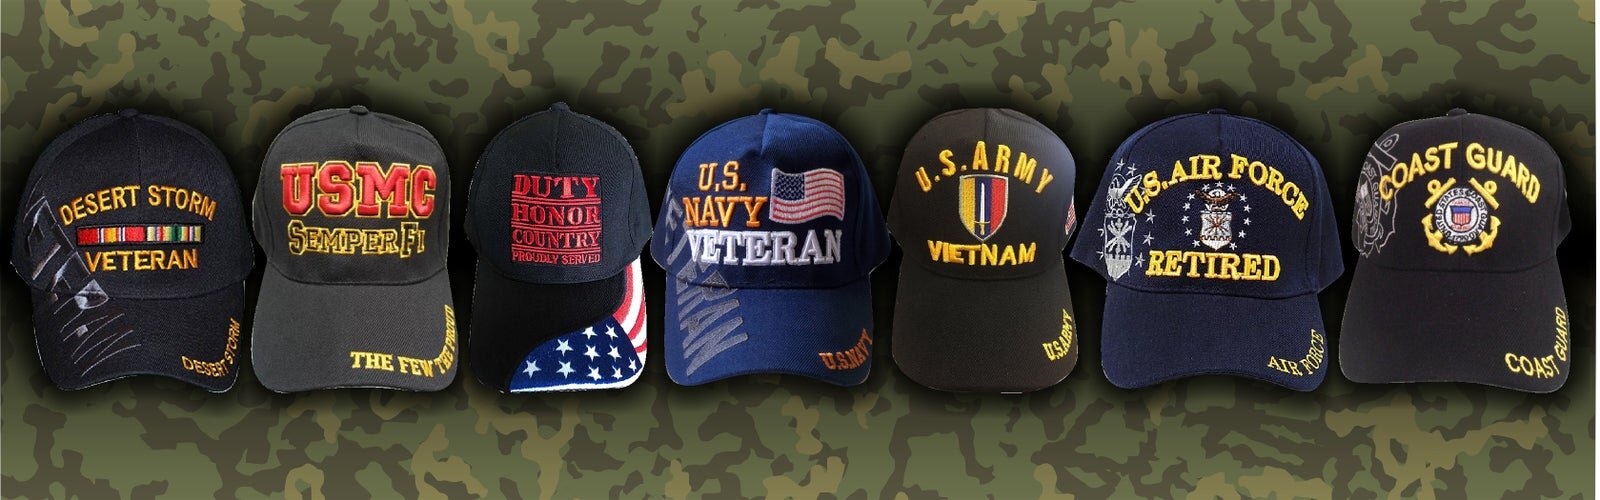 Retired Military, Veteran and Officially Licensed Hats!